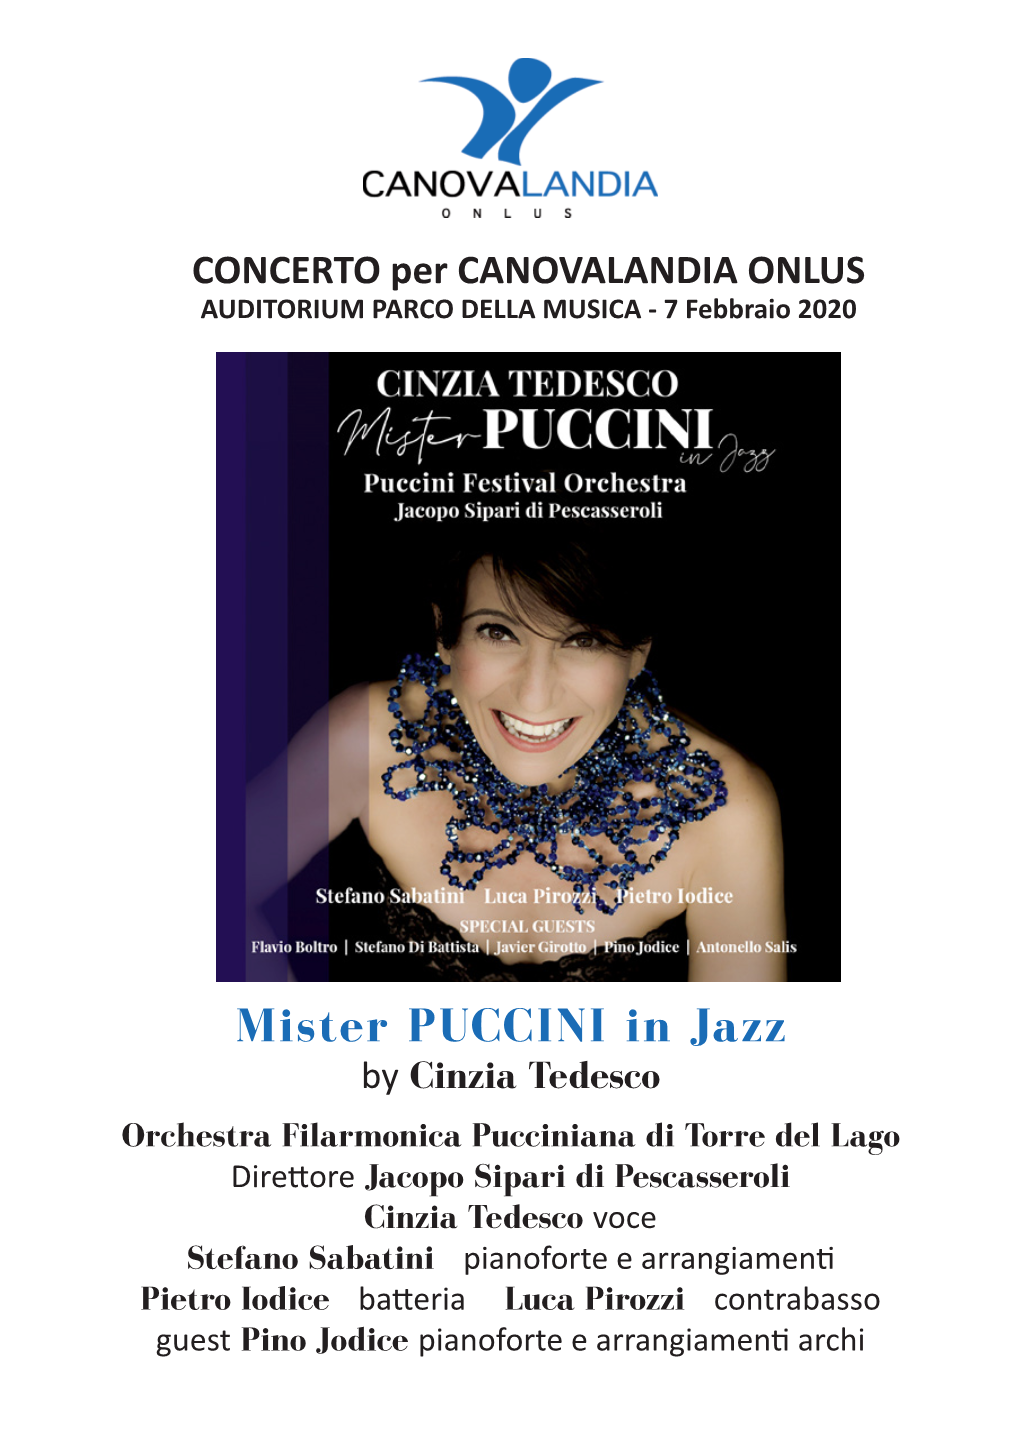 Mister PUCCINI in Jazz